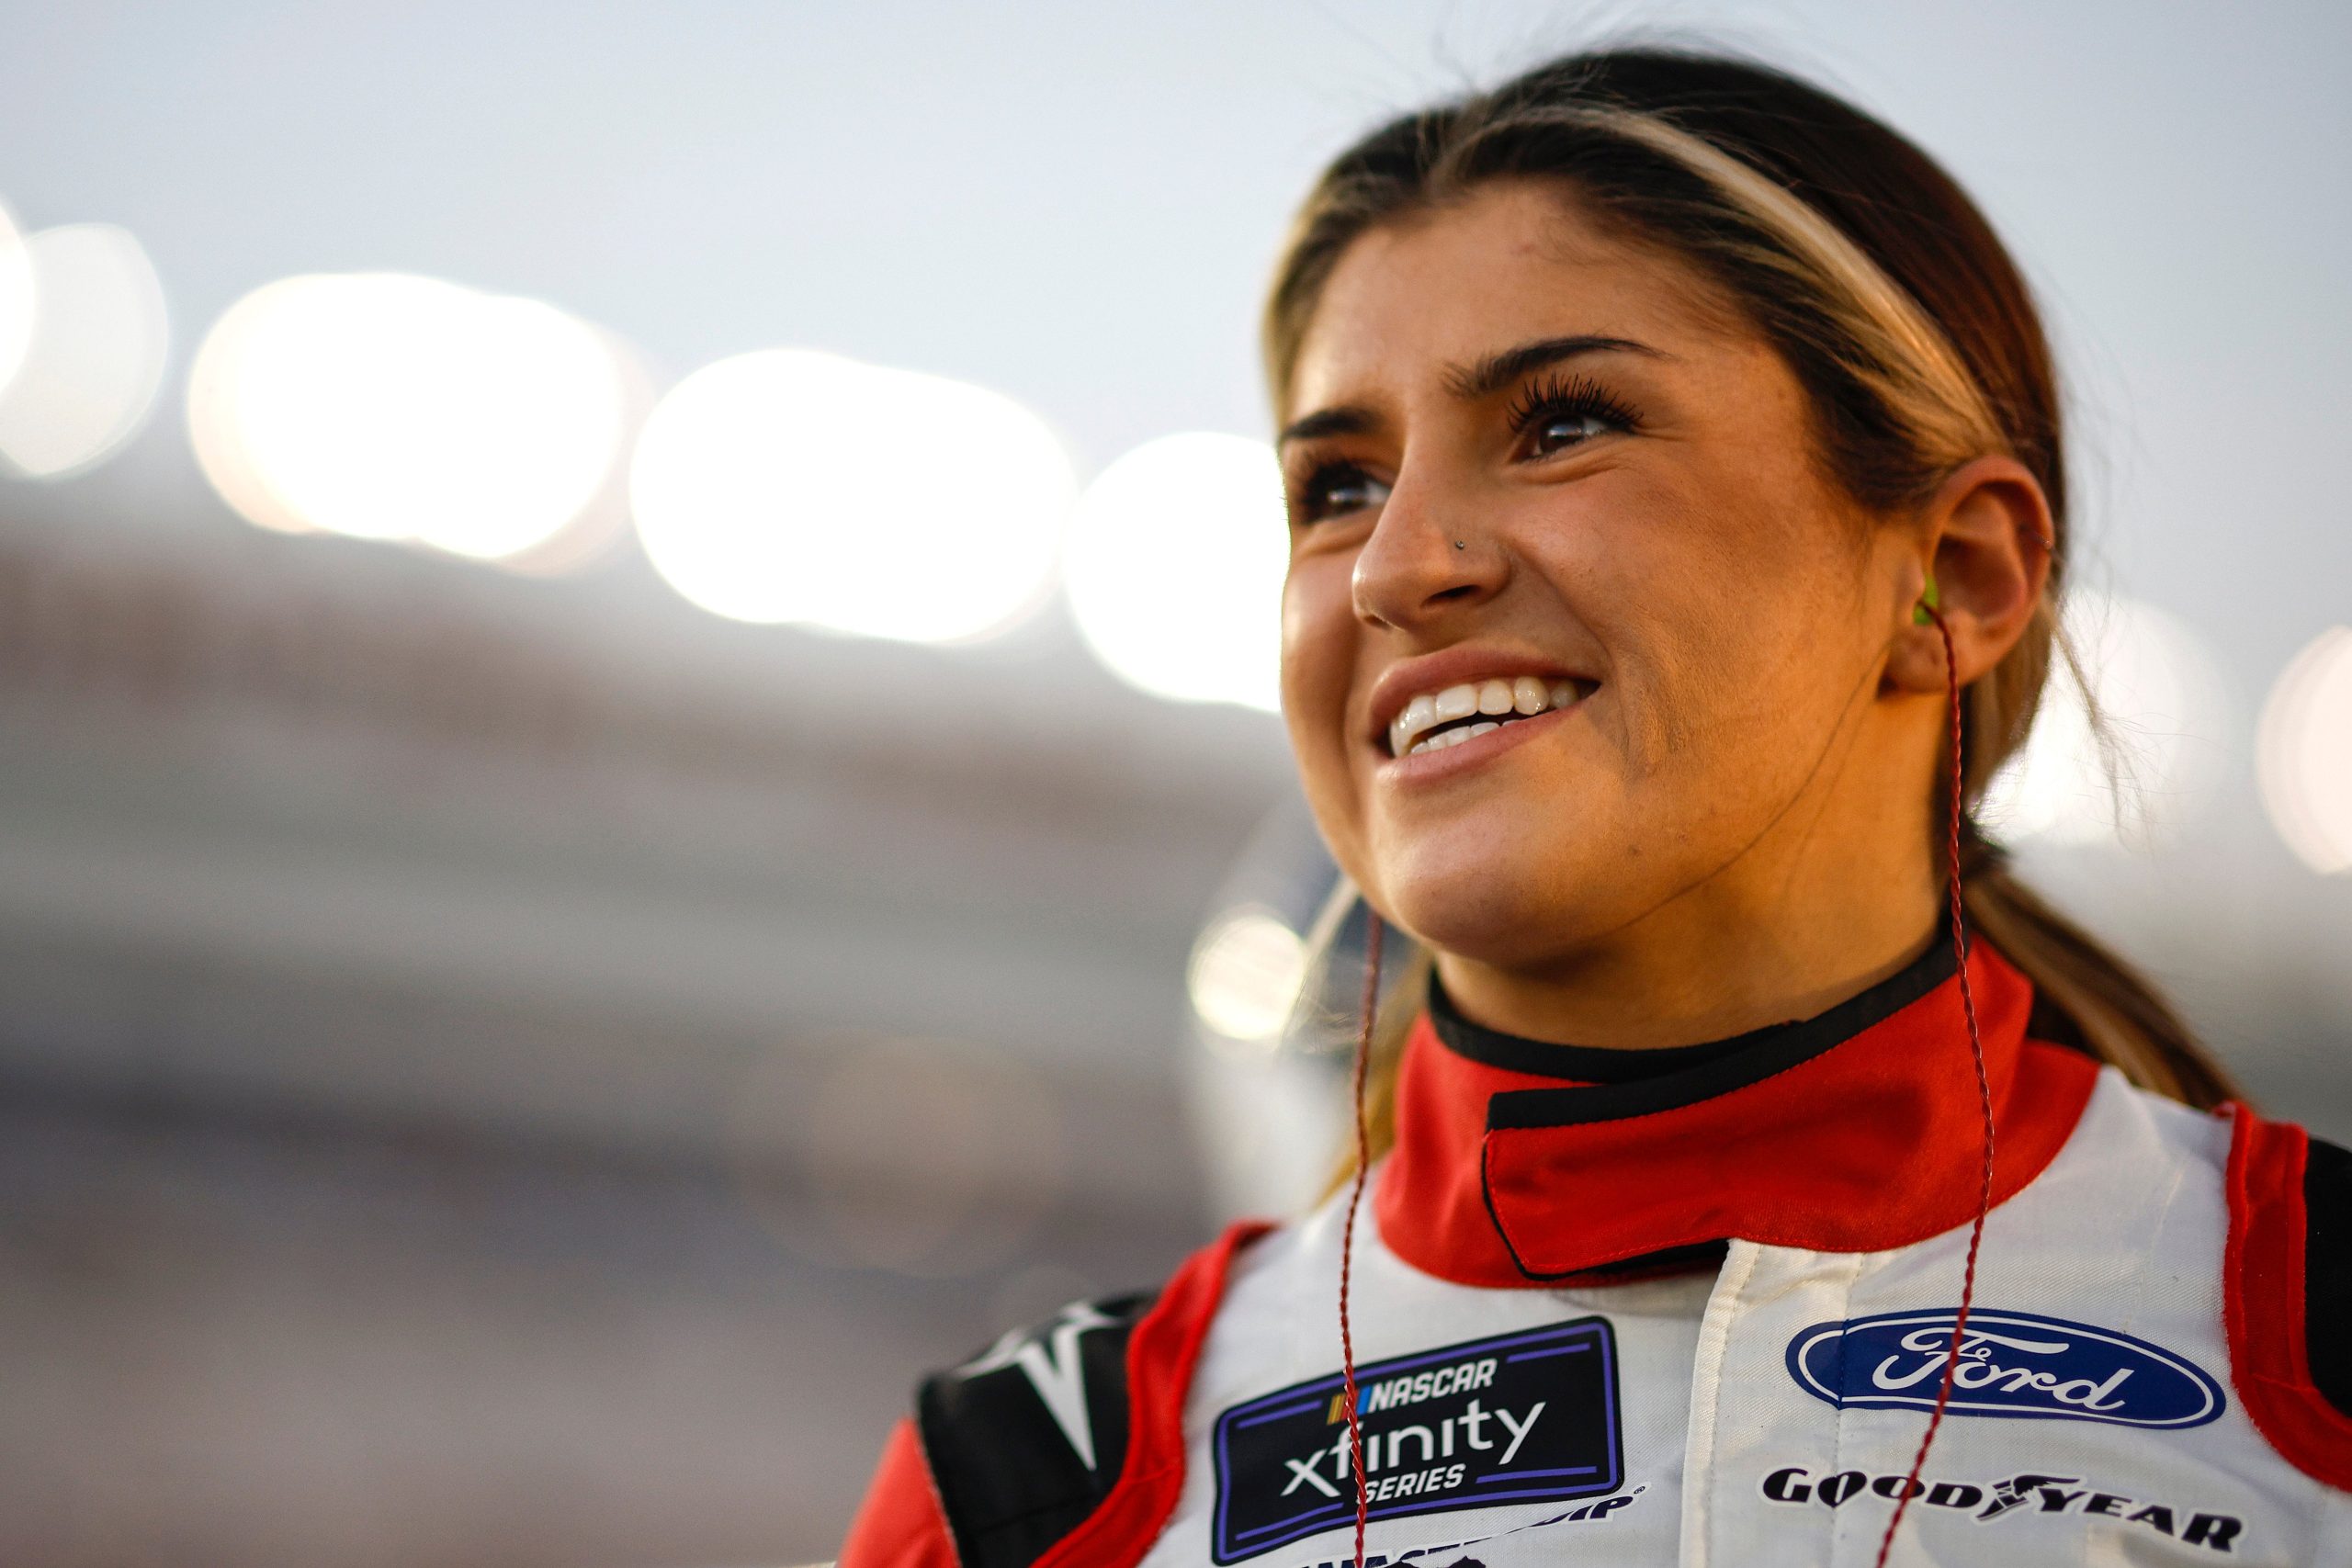 LAS VEGAS, NEVADA - OCTOBER 14: Hailie Deegan, driver of the #07 Pristine Auction Ford, waits on the grid during qualifying for the Event Name: NASCAR Xfinity Series Alsco Uniforms 302 at Las Vegas Motor Speedway on October 14, 2022 in Las Vegas, Nevada. (Photo by Sean Gardner/Getty Images)